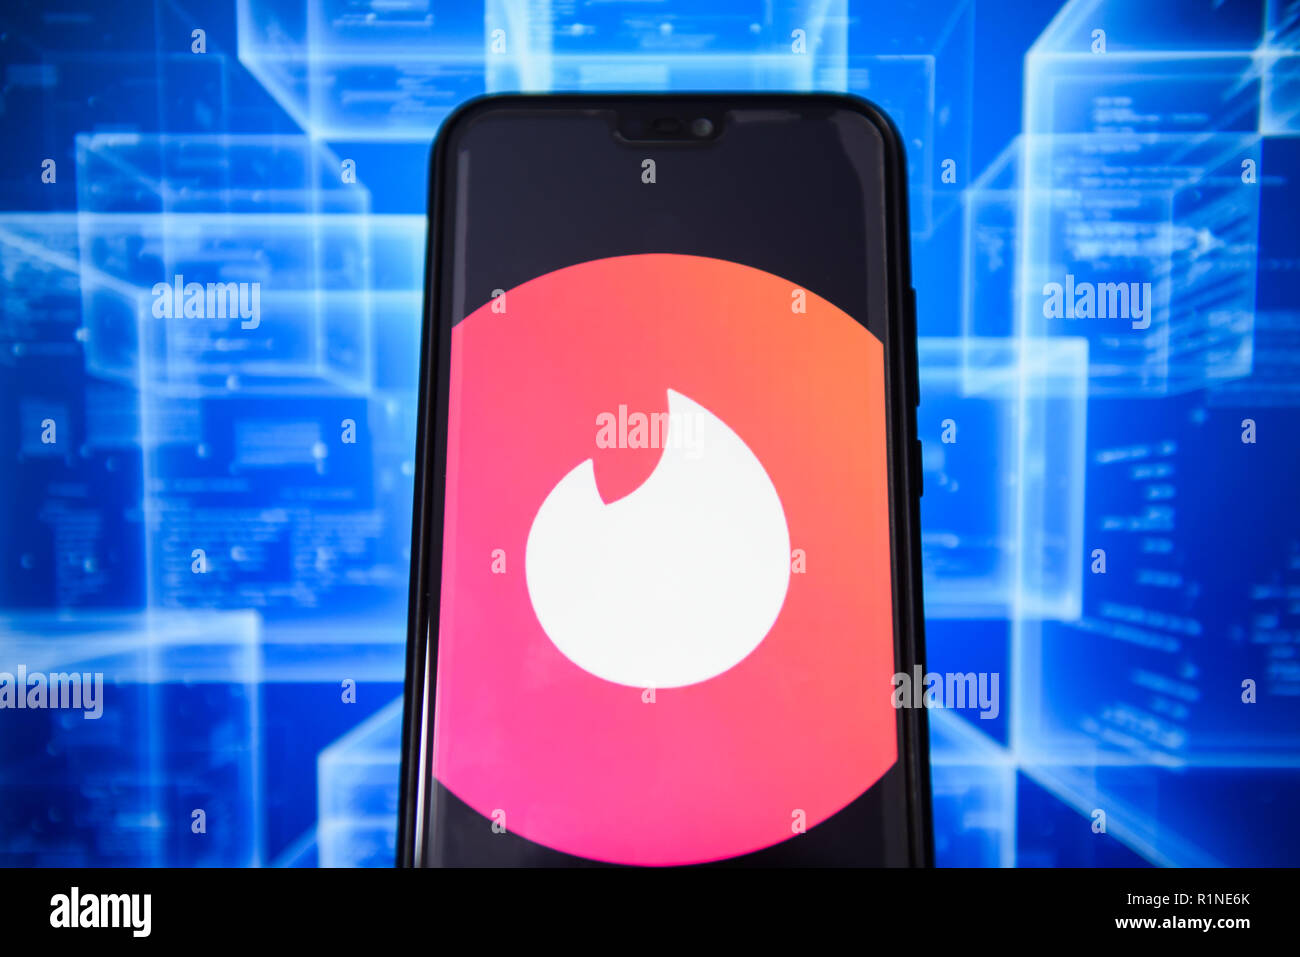 Tinder logo is seen on an android mobile phone. Stock Photo